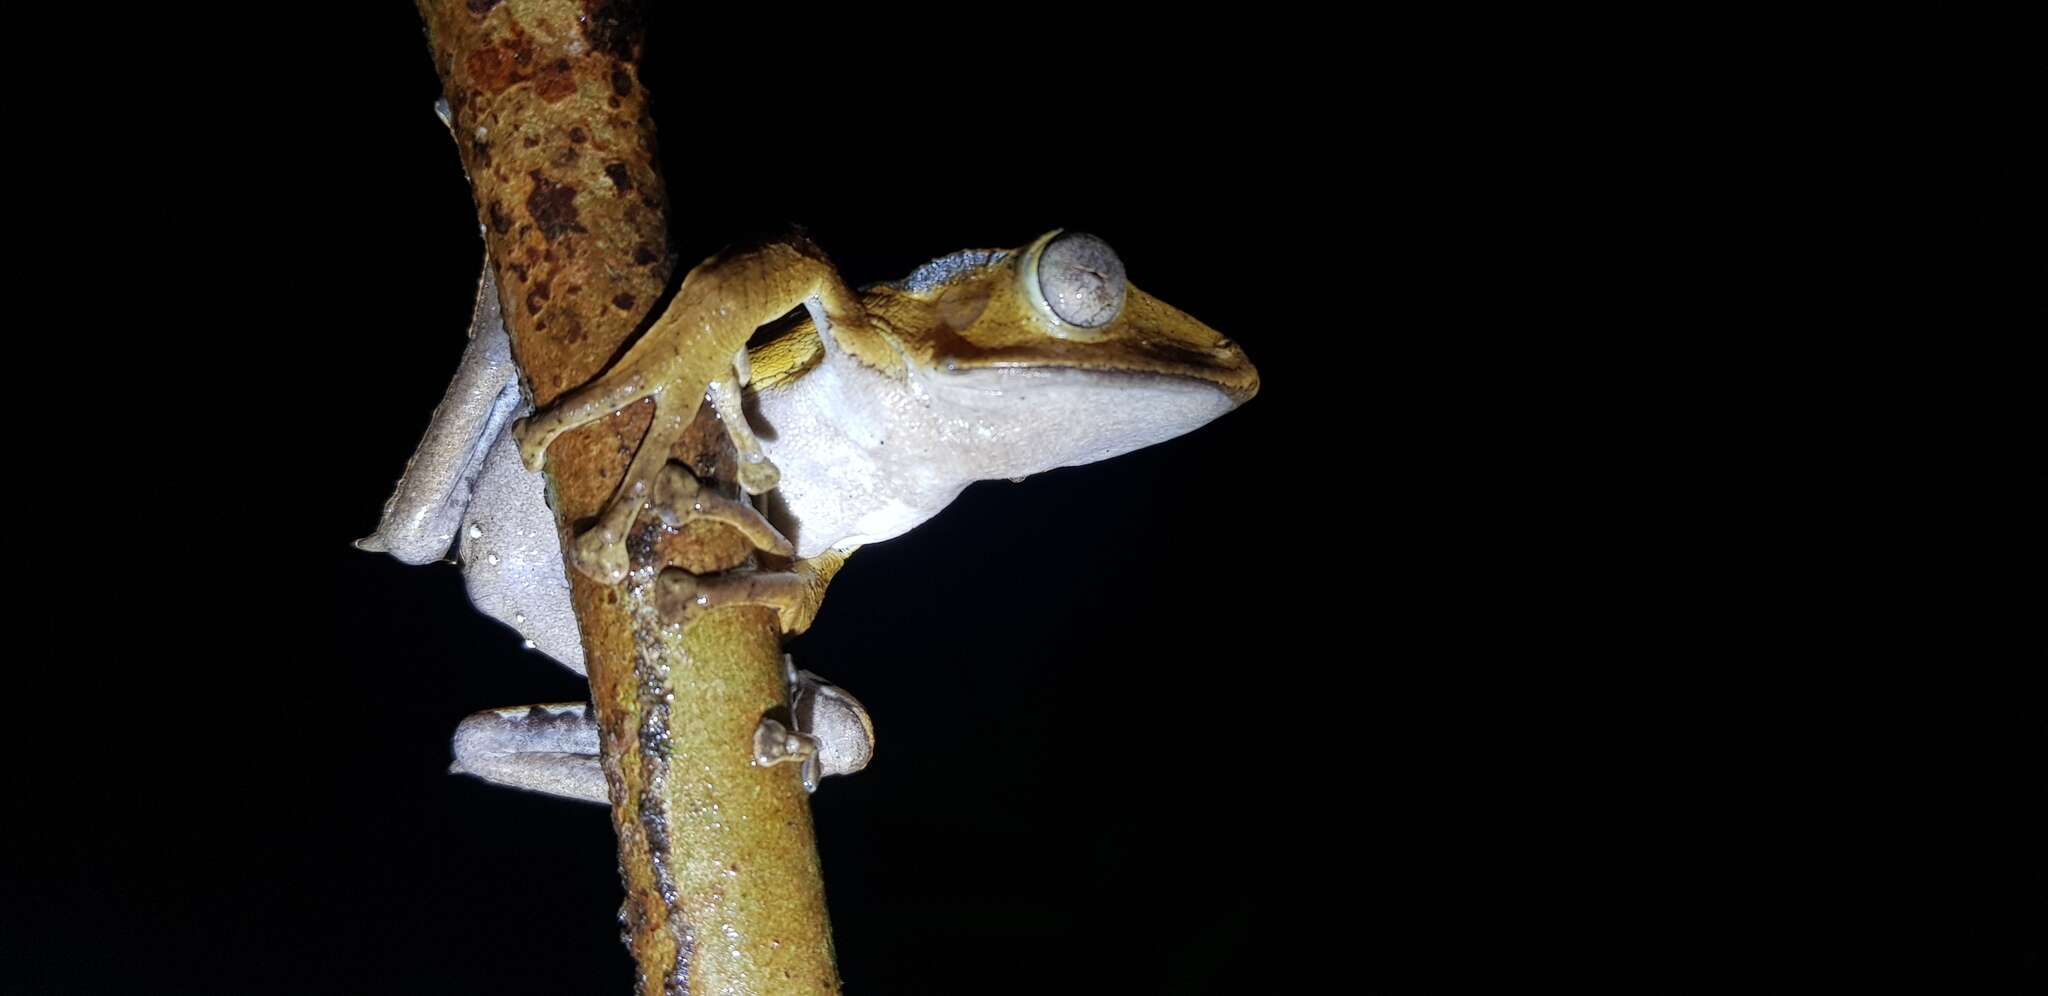 Image of File-Eared Tree Frog